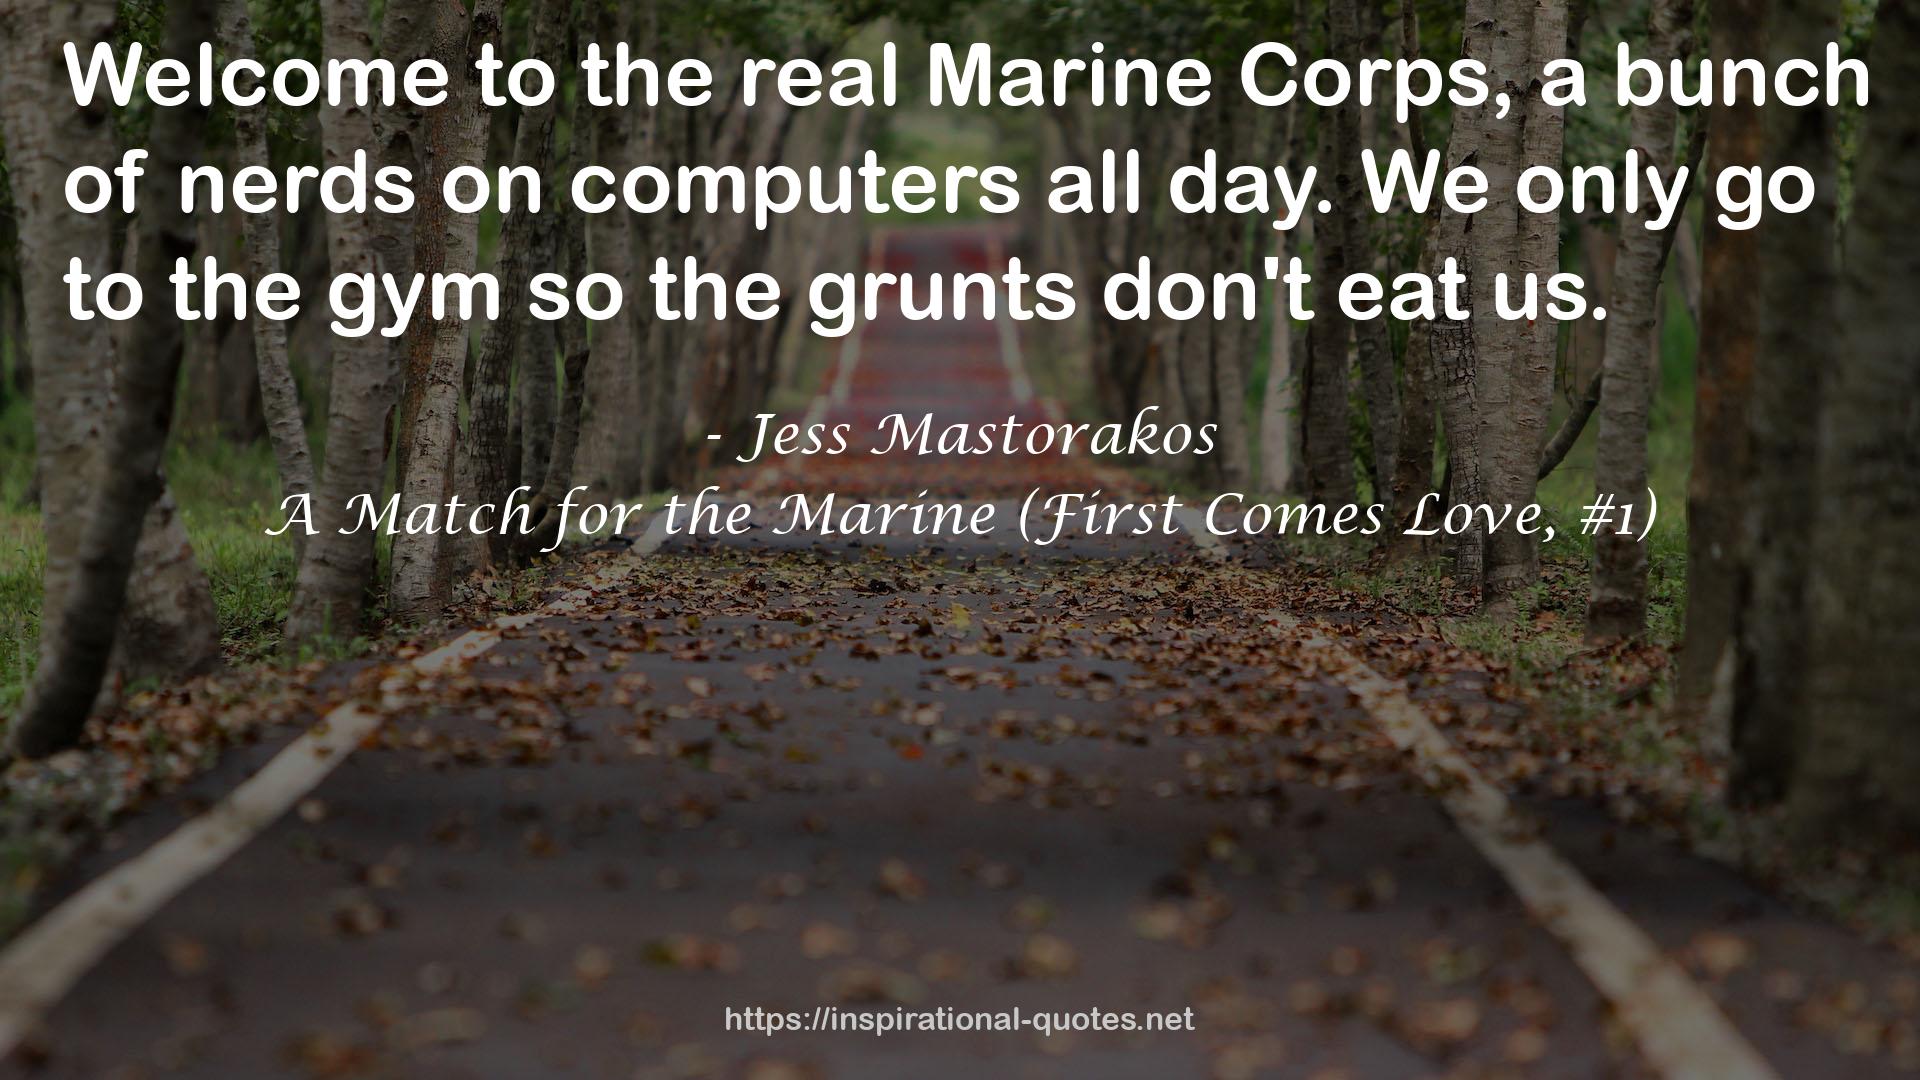 A Match for the Marine (First Comes Love, #1) QUOTES